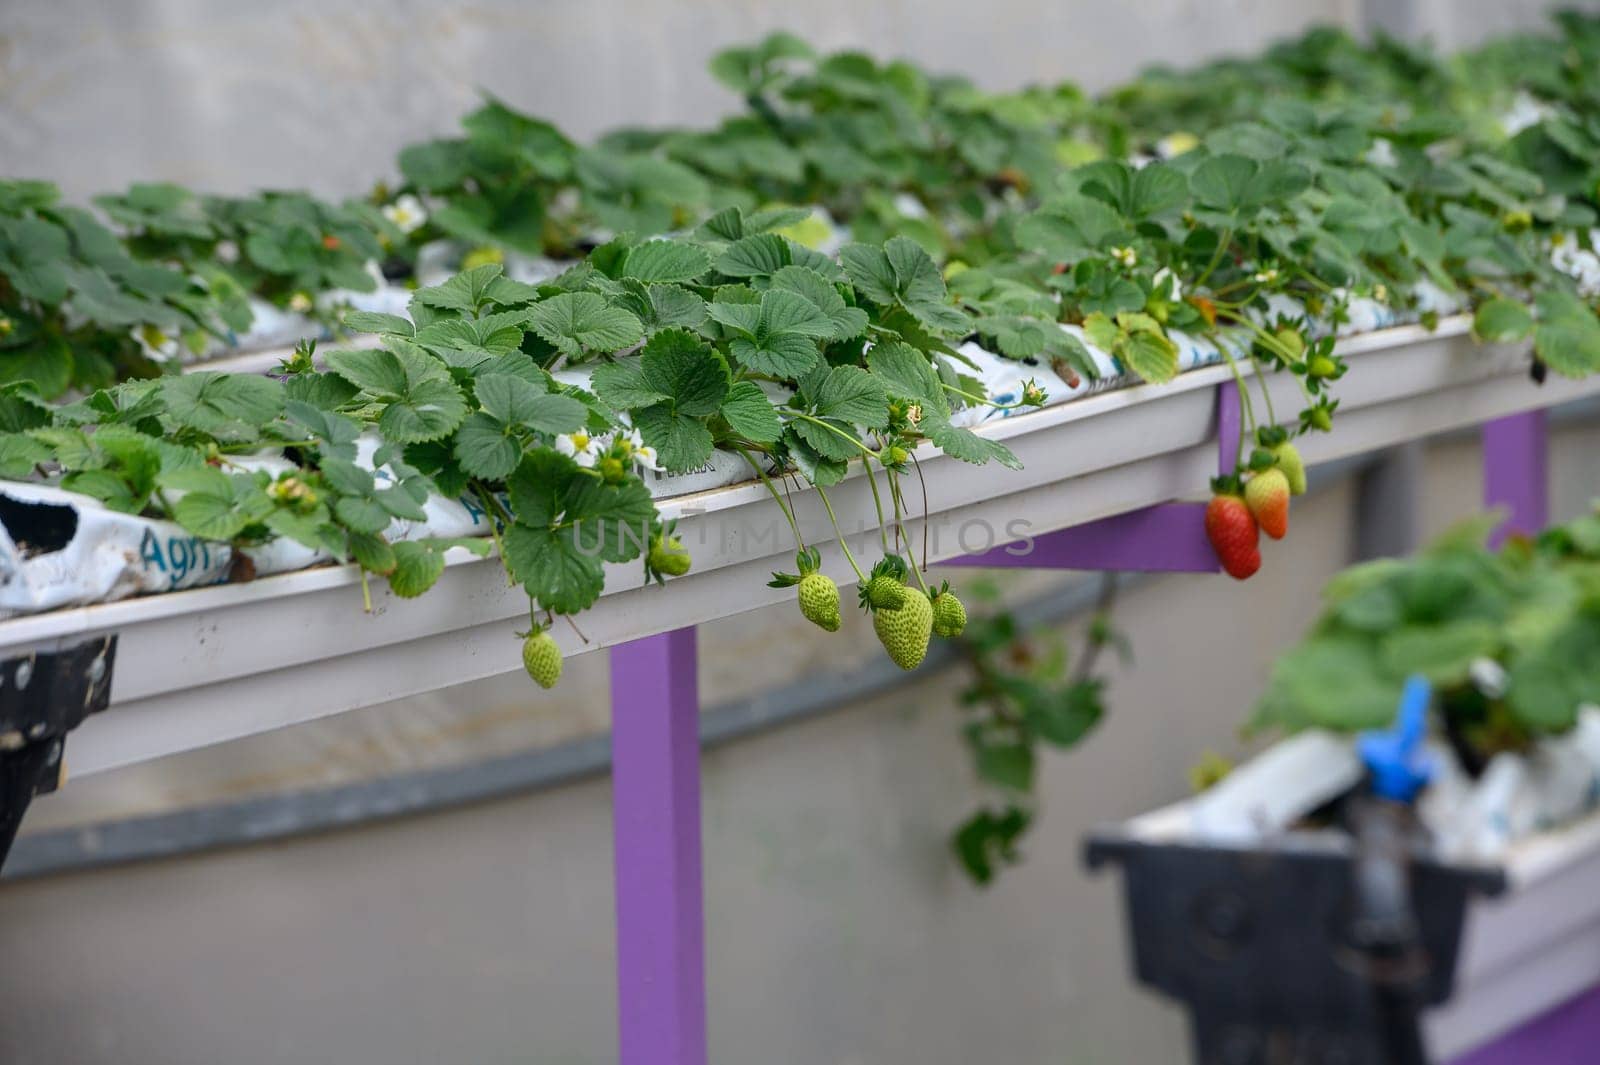 strawberries on hanging beds in a greenhouse 5 by Mixa74